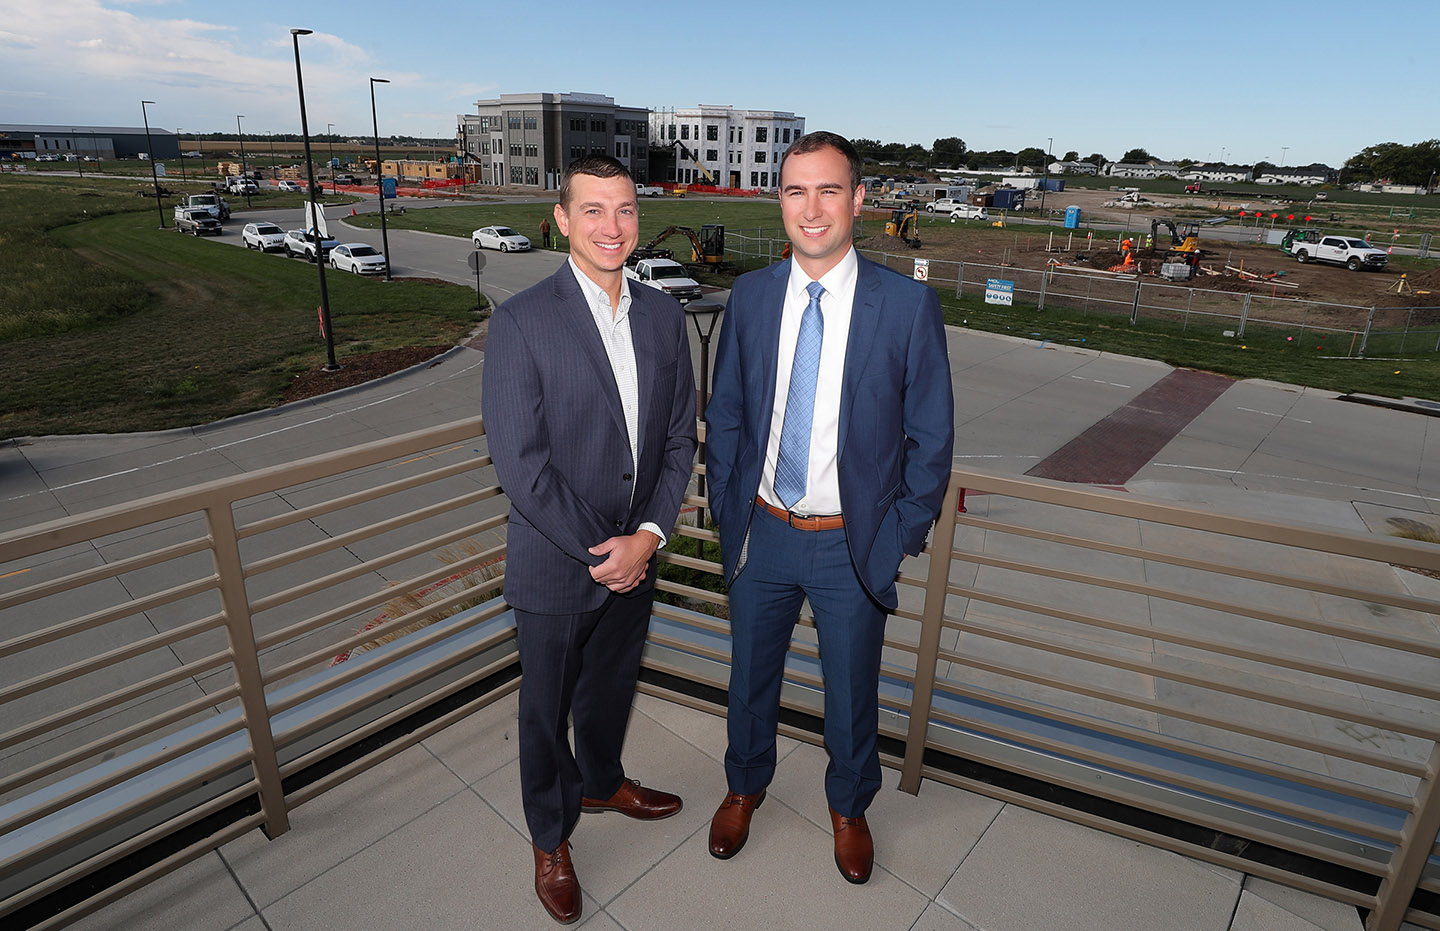 Joey Cochran, left, and Michael Christen are pictured at UNK’s University Village development. Cochran is a member of the University Village board and Christen serves as executive director.